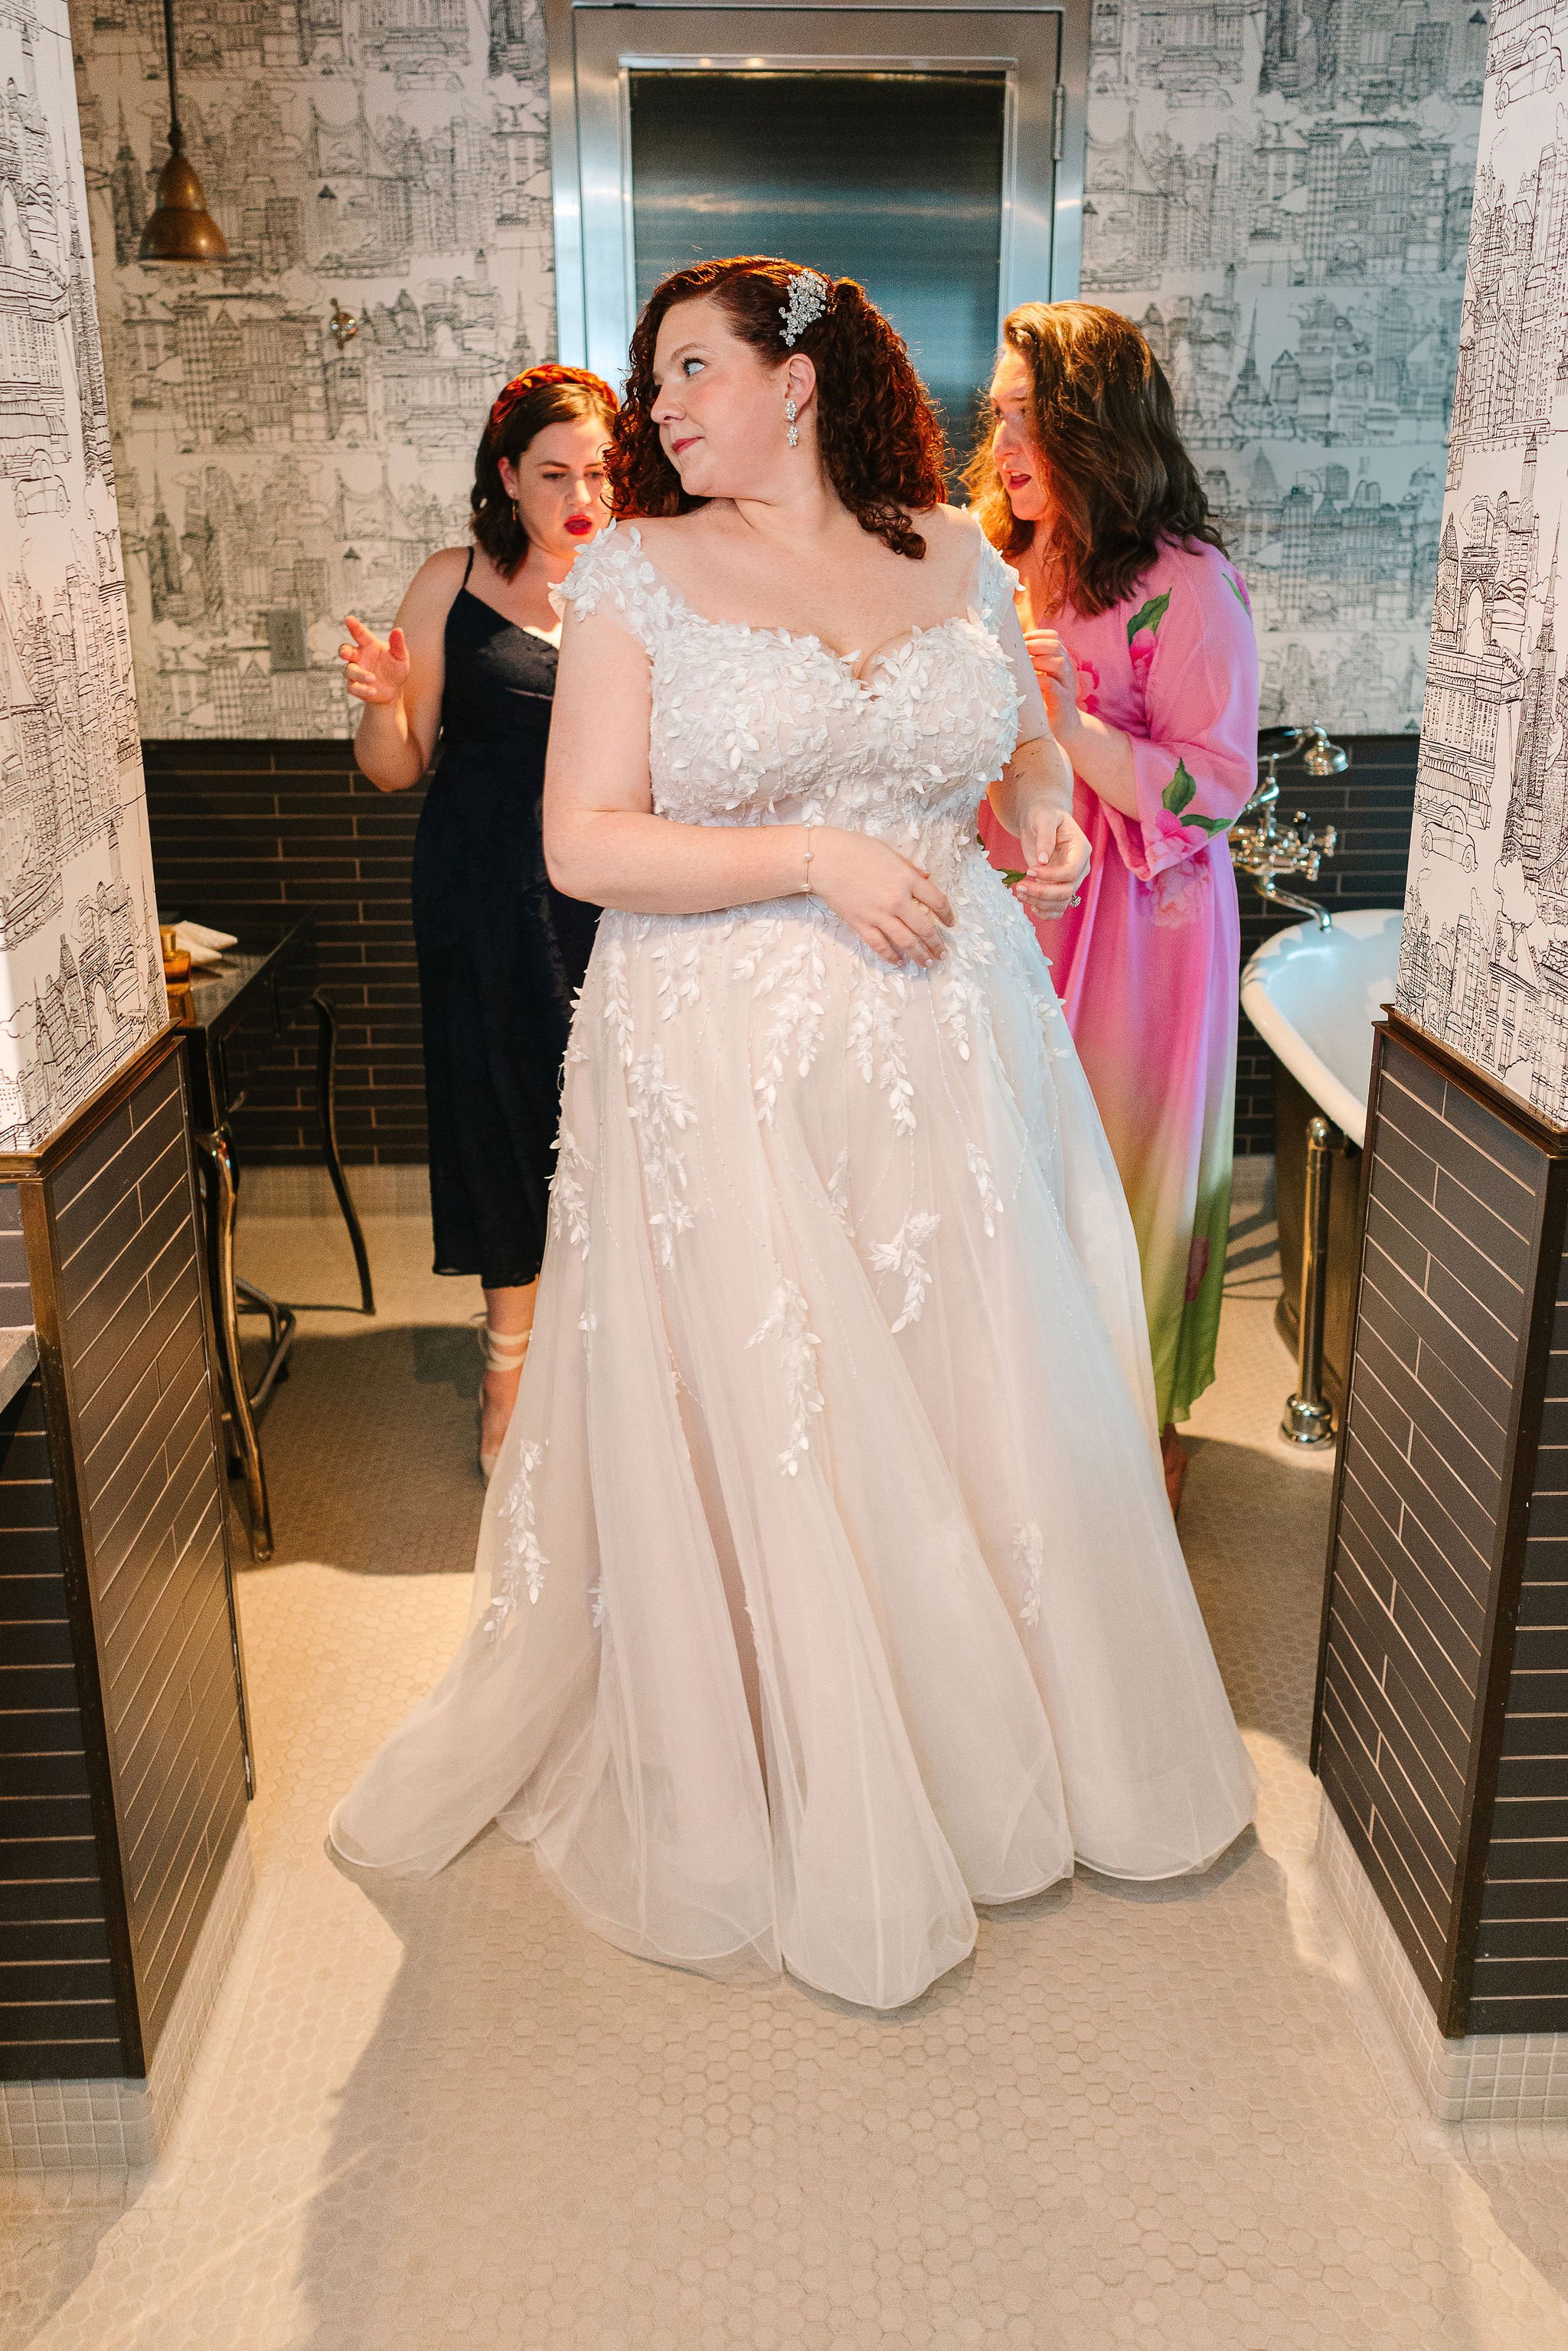 Summer Multicultural wedding in New York, NY | BLB Events | Wedding Planner | Rima Brindamour Photography | Soho Grand Penthouse